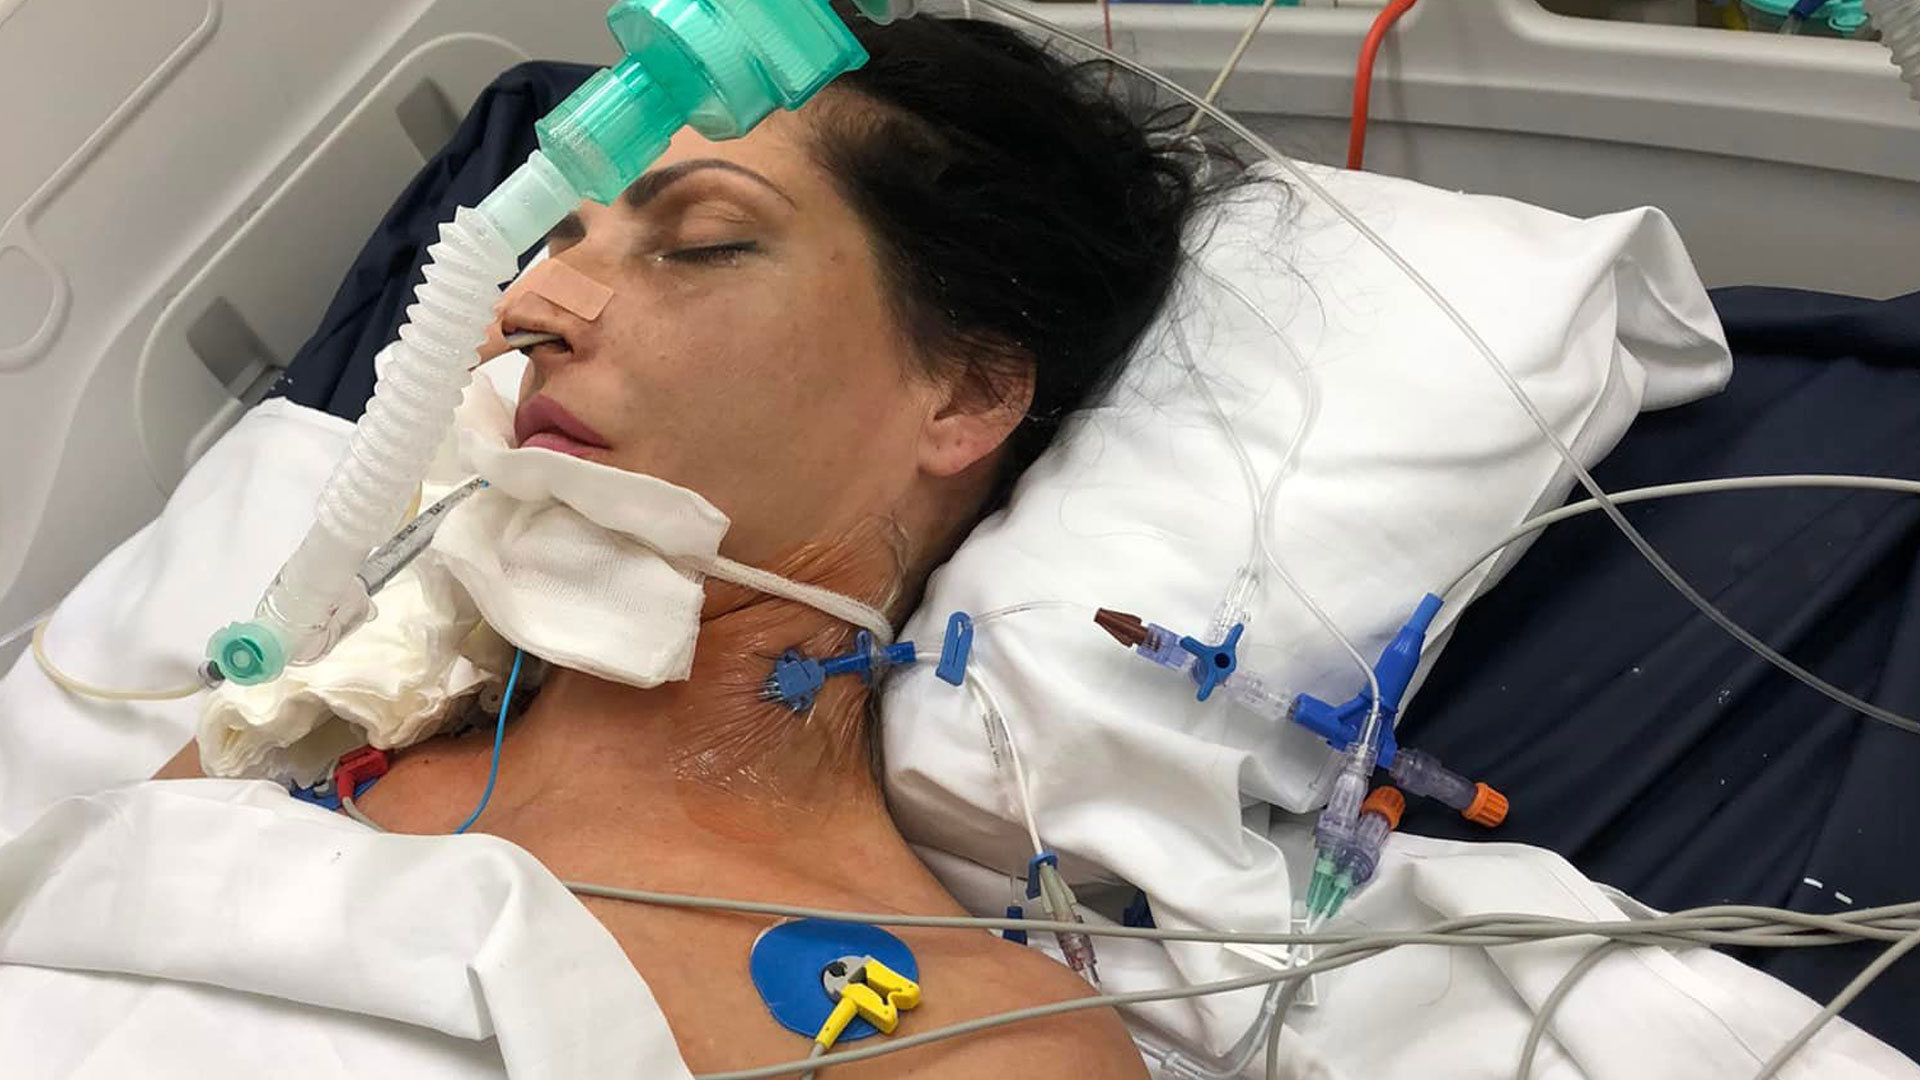 My sister’s botched £18k cosmetic surgery left her in a coma – she’ll never recover